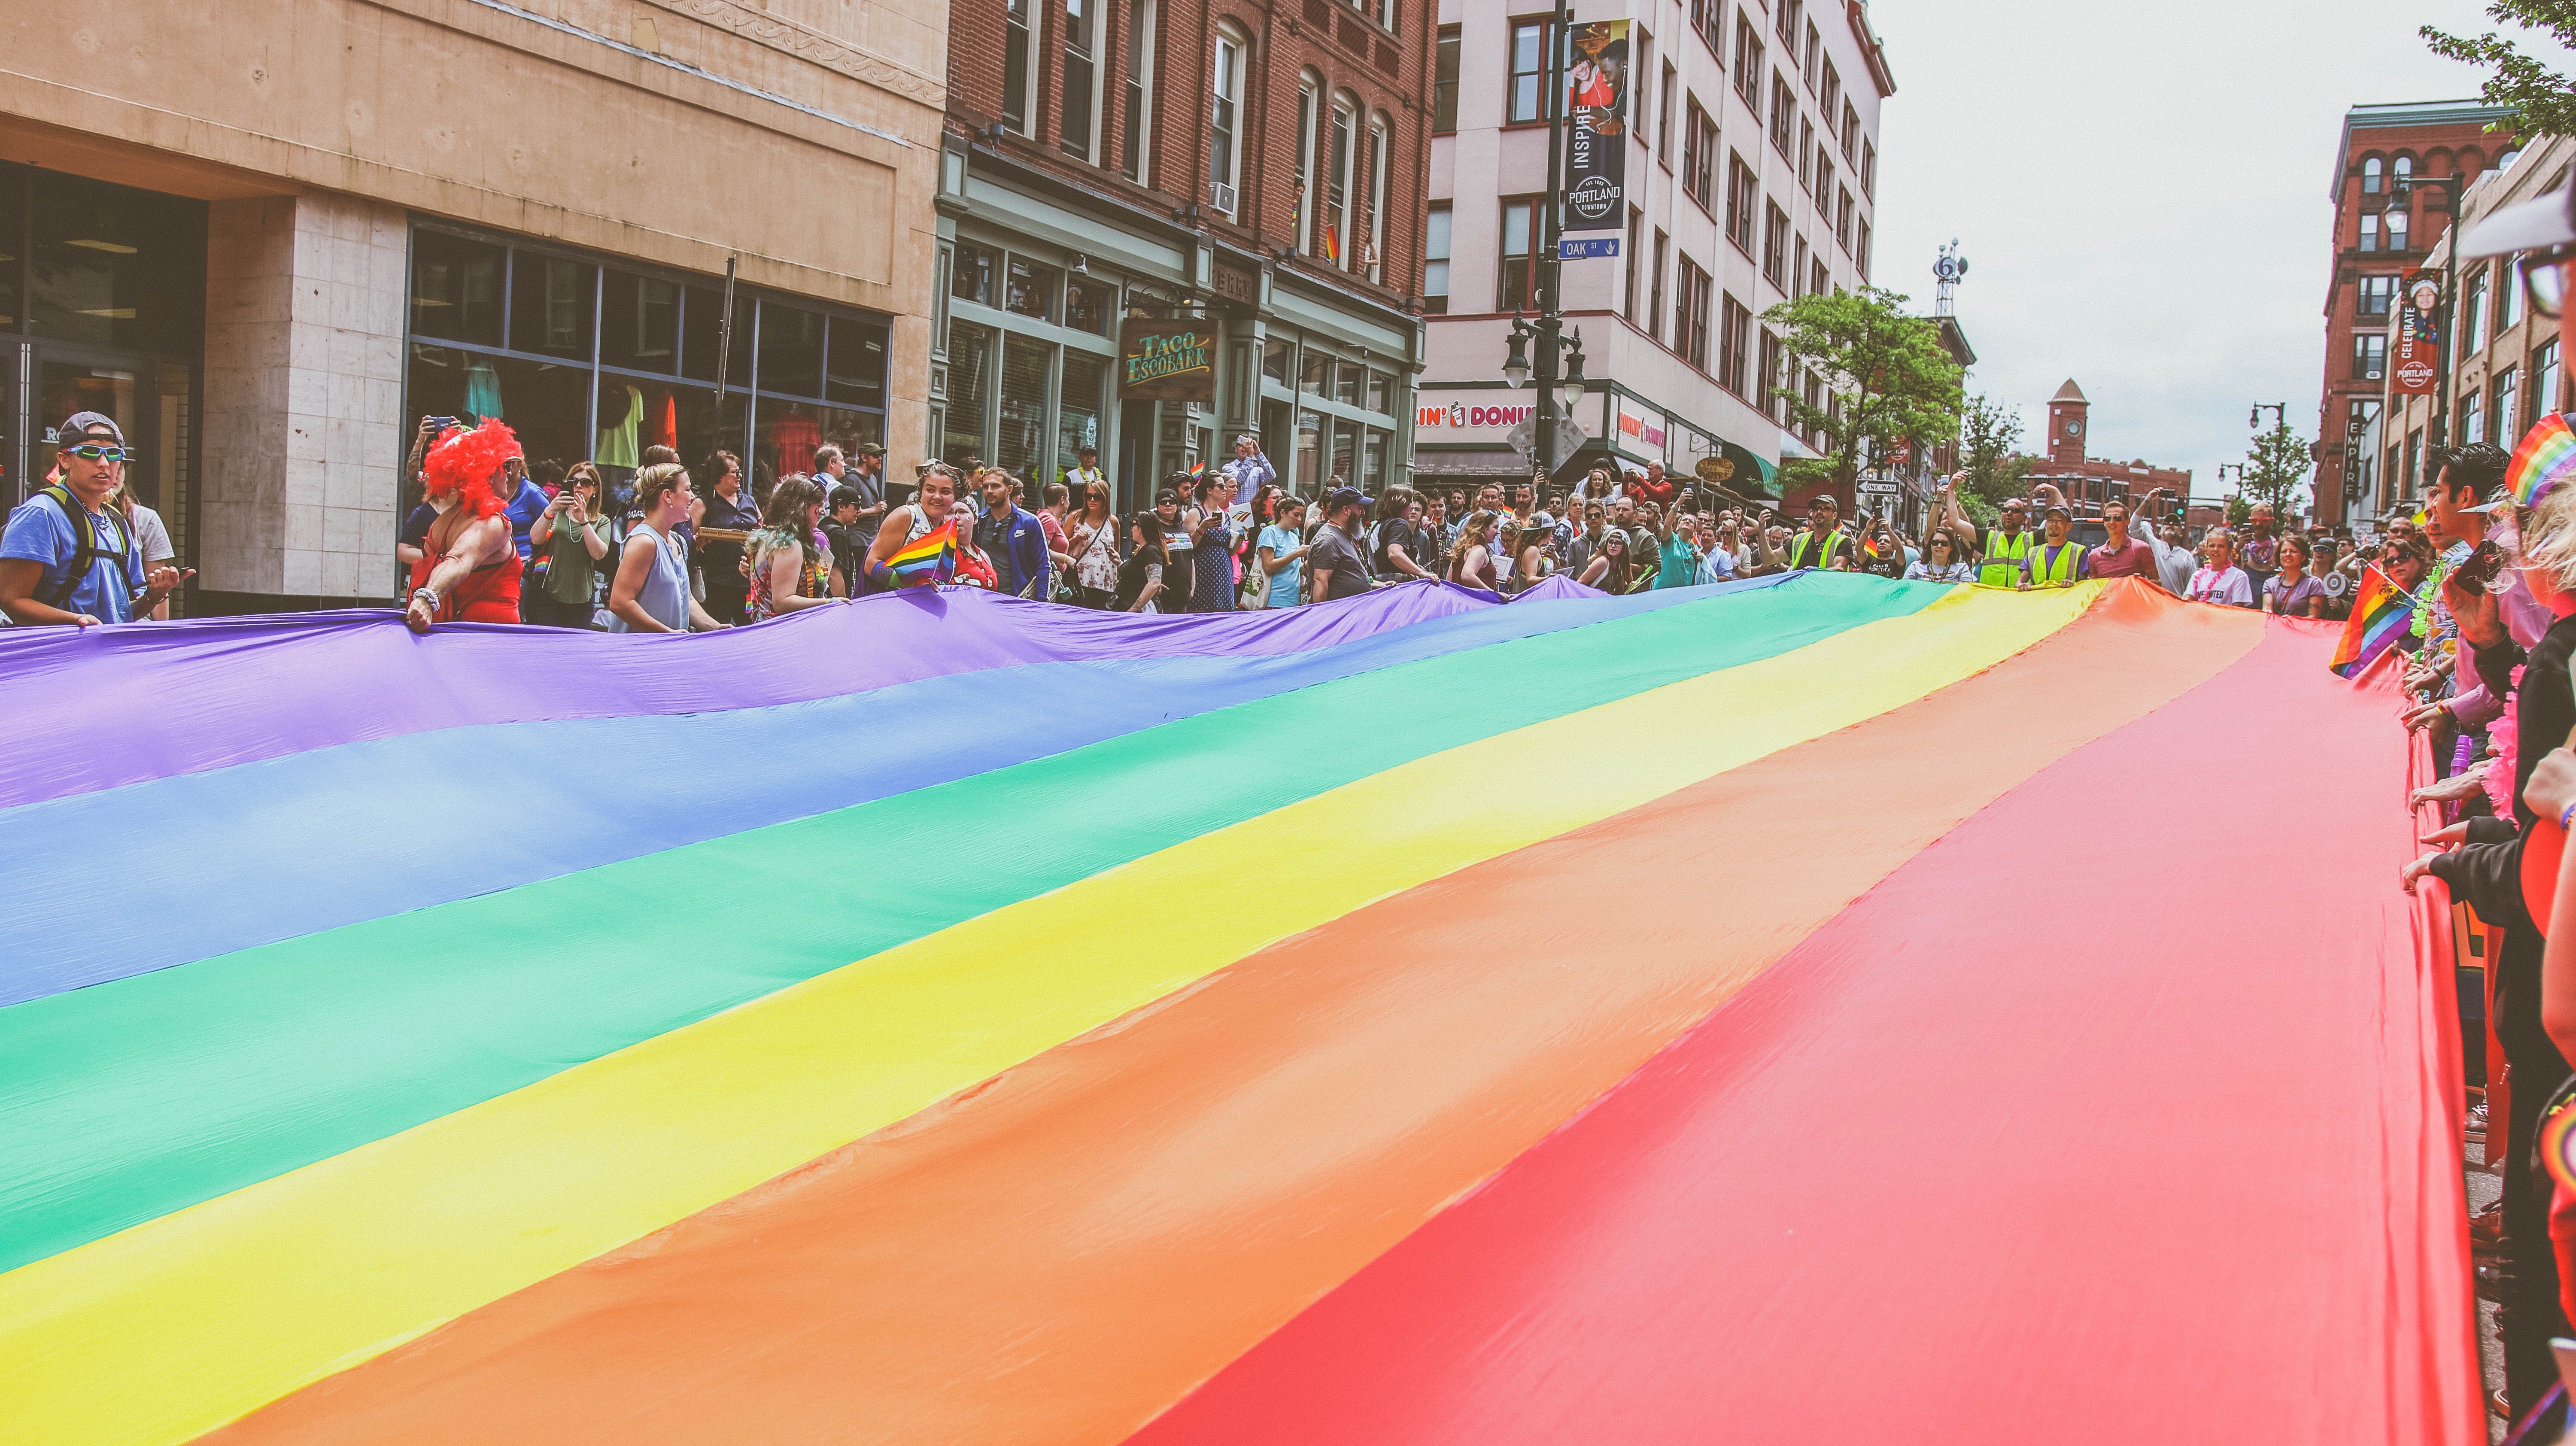 A Timeline of the Decriminalization of Homosexuality